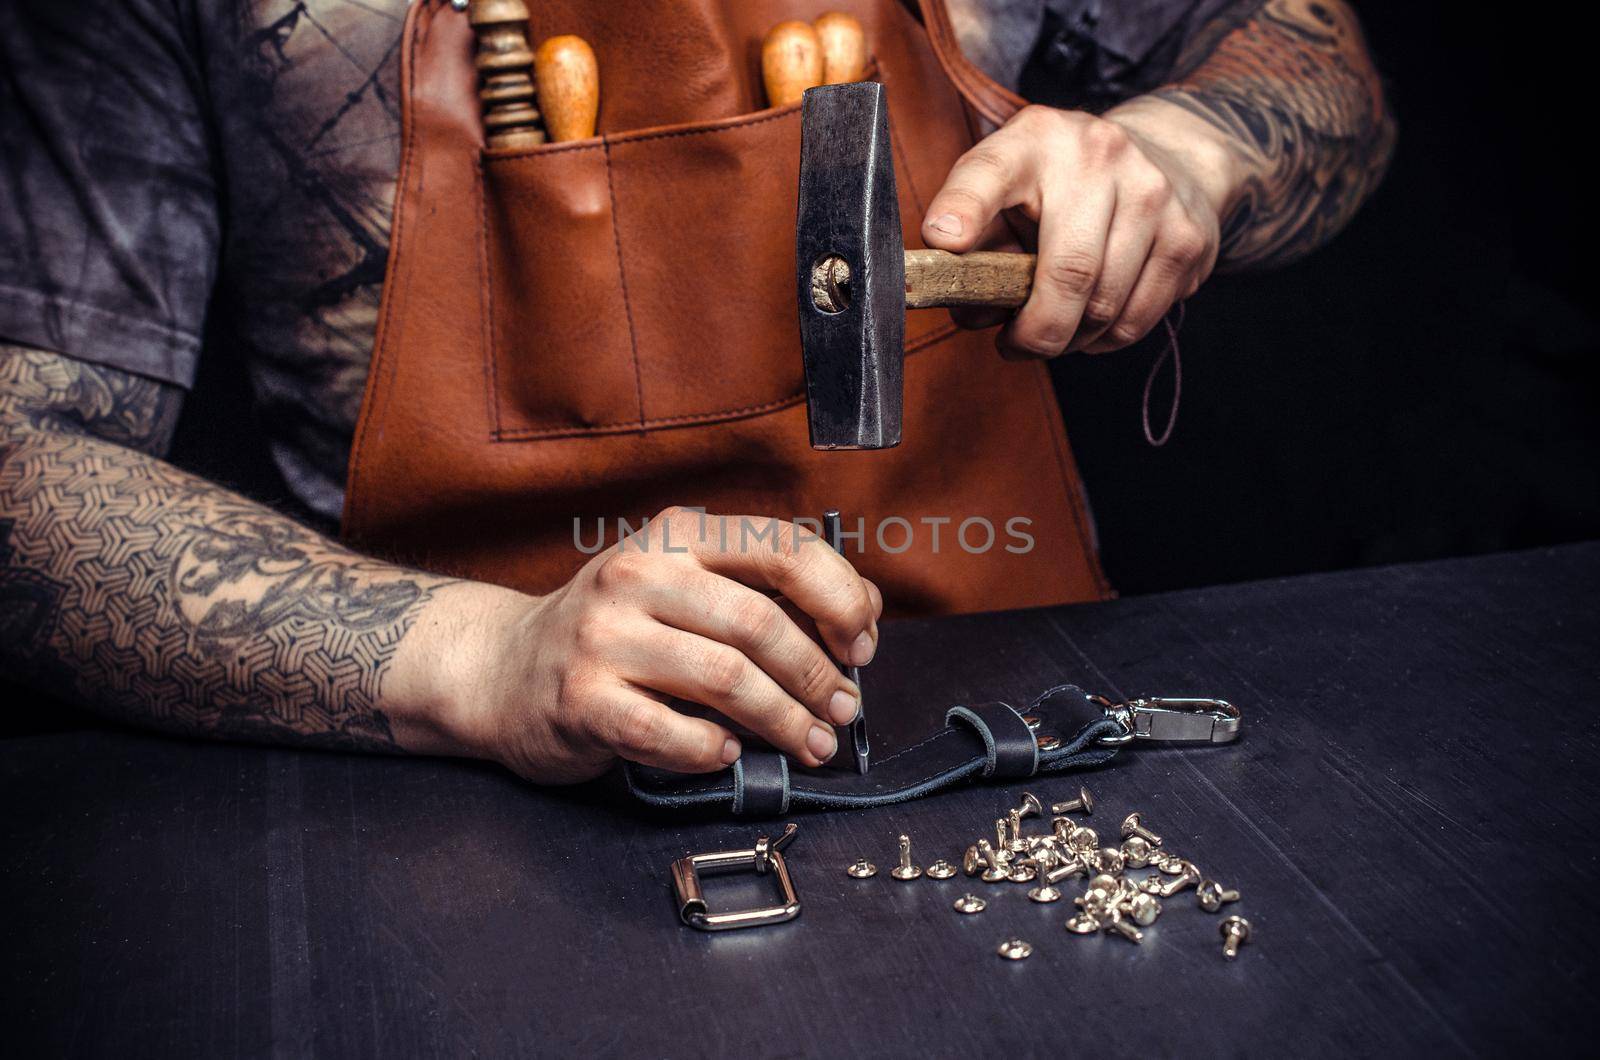 Handyman creating leatherwork at his workplace. Leather Craftsman producing leather workpiece in his leather shop.